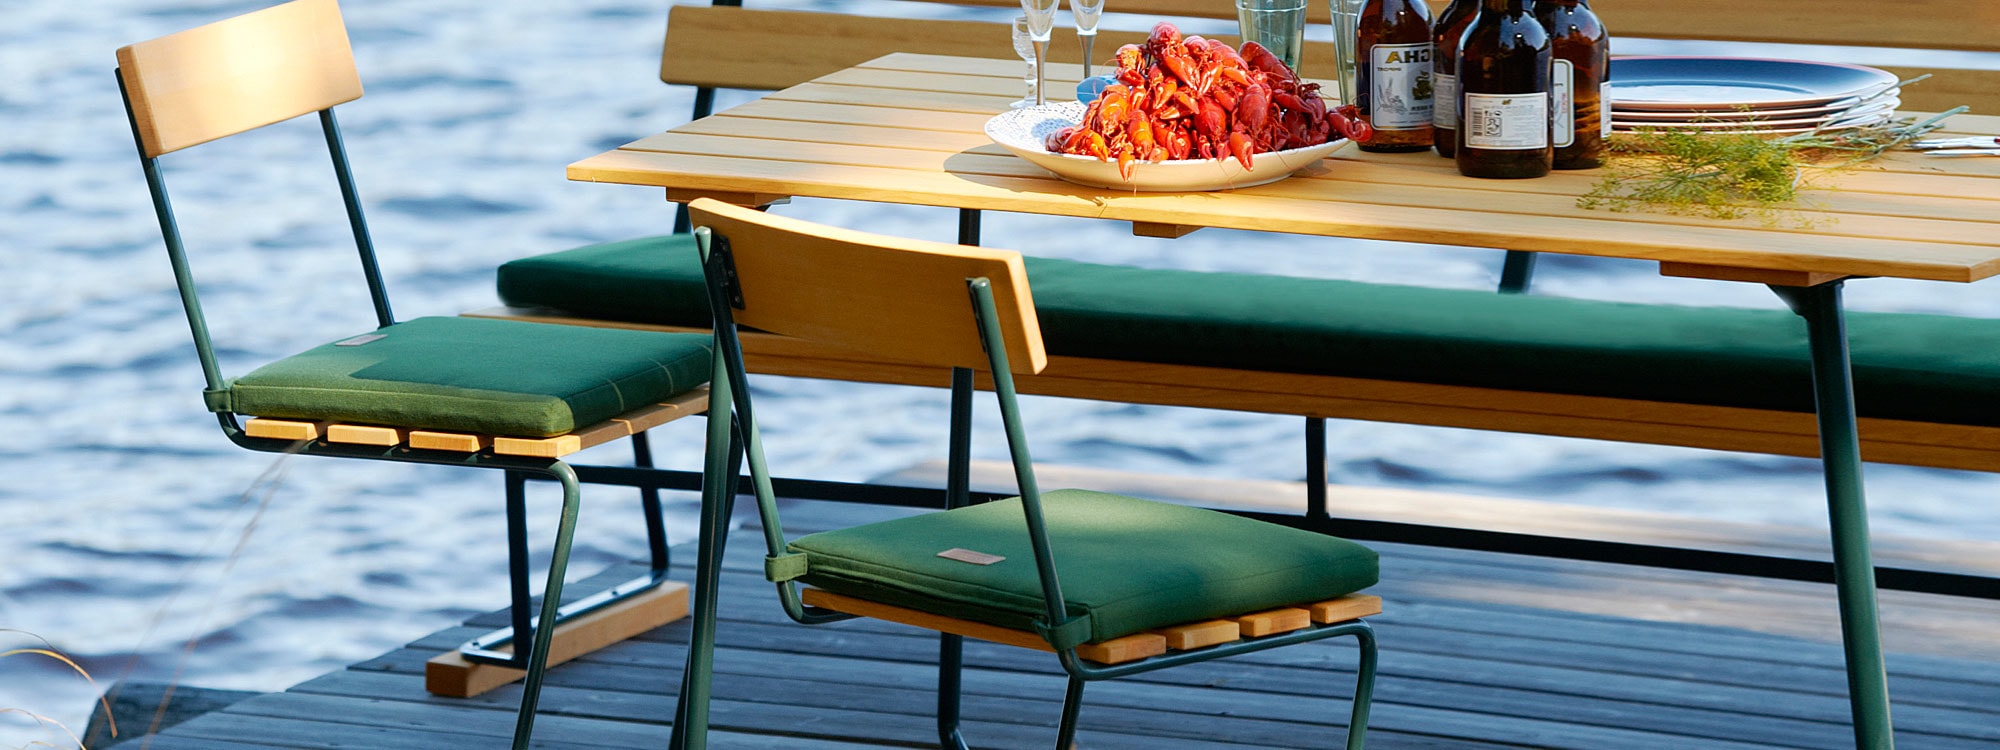 Image of Grythyttan Stålmobler Chair 1 cantilevered outdoor chair with knock-down outdoor table